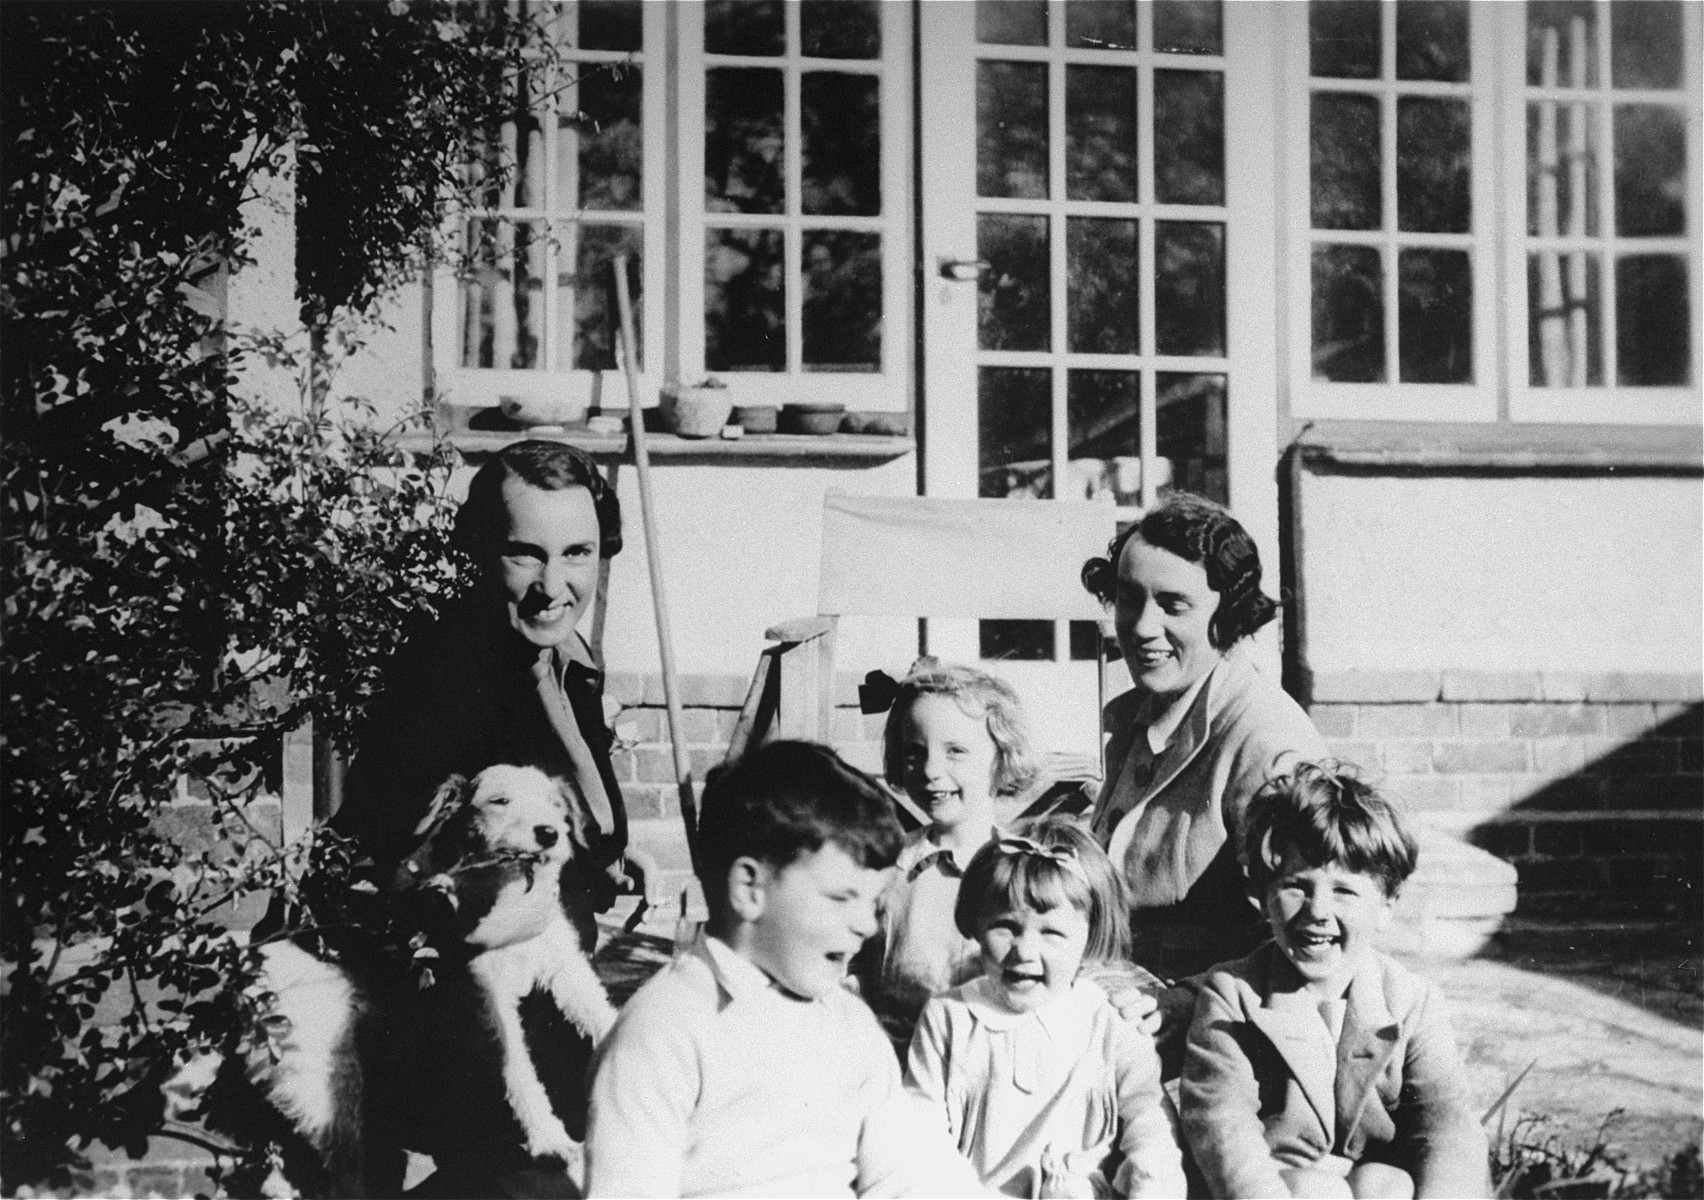 Two British Quaker women who served as foster parents to Jewish Kindertransport children, pose with a group of young children in Bristol.

Mary Moar is pictured on left; her sister Mrs. Baker, on the right.